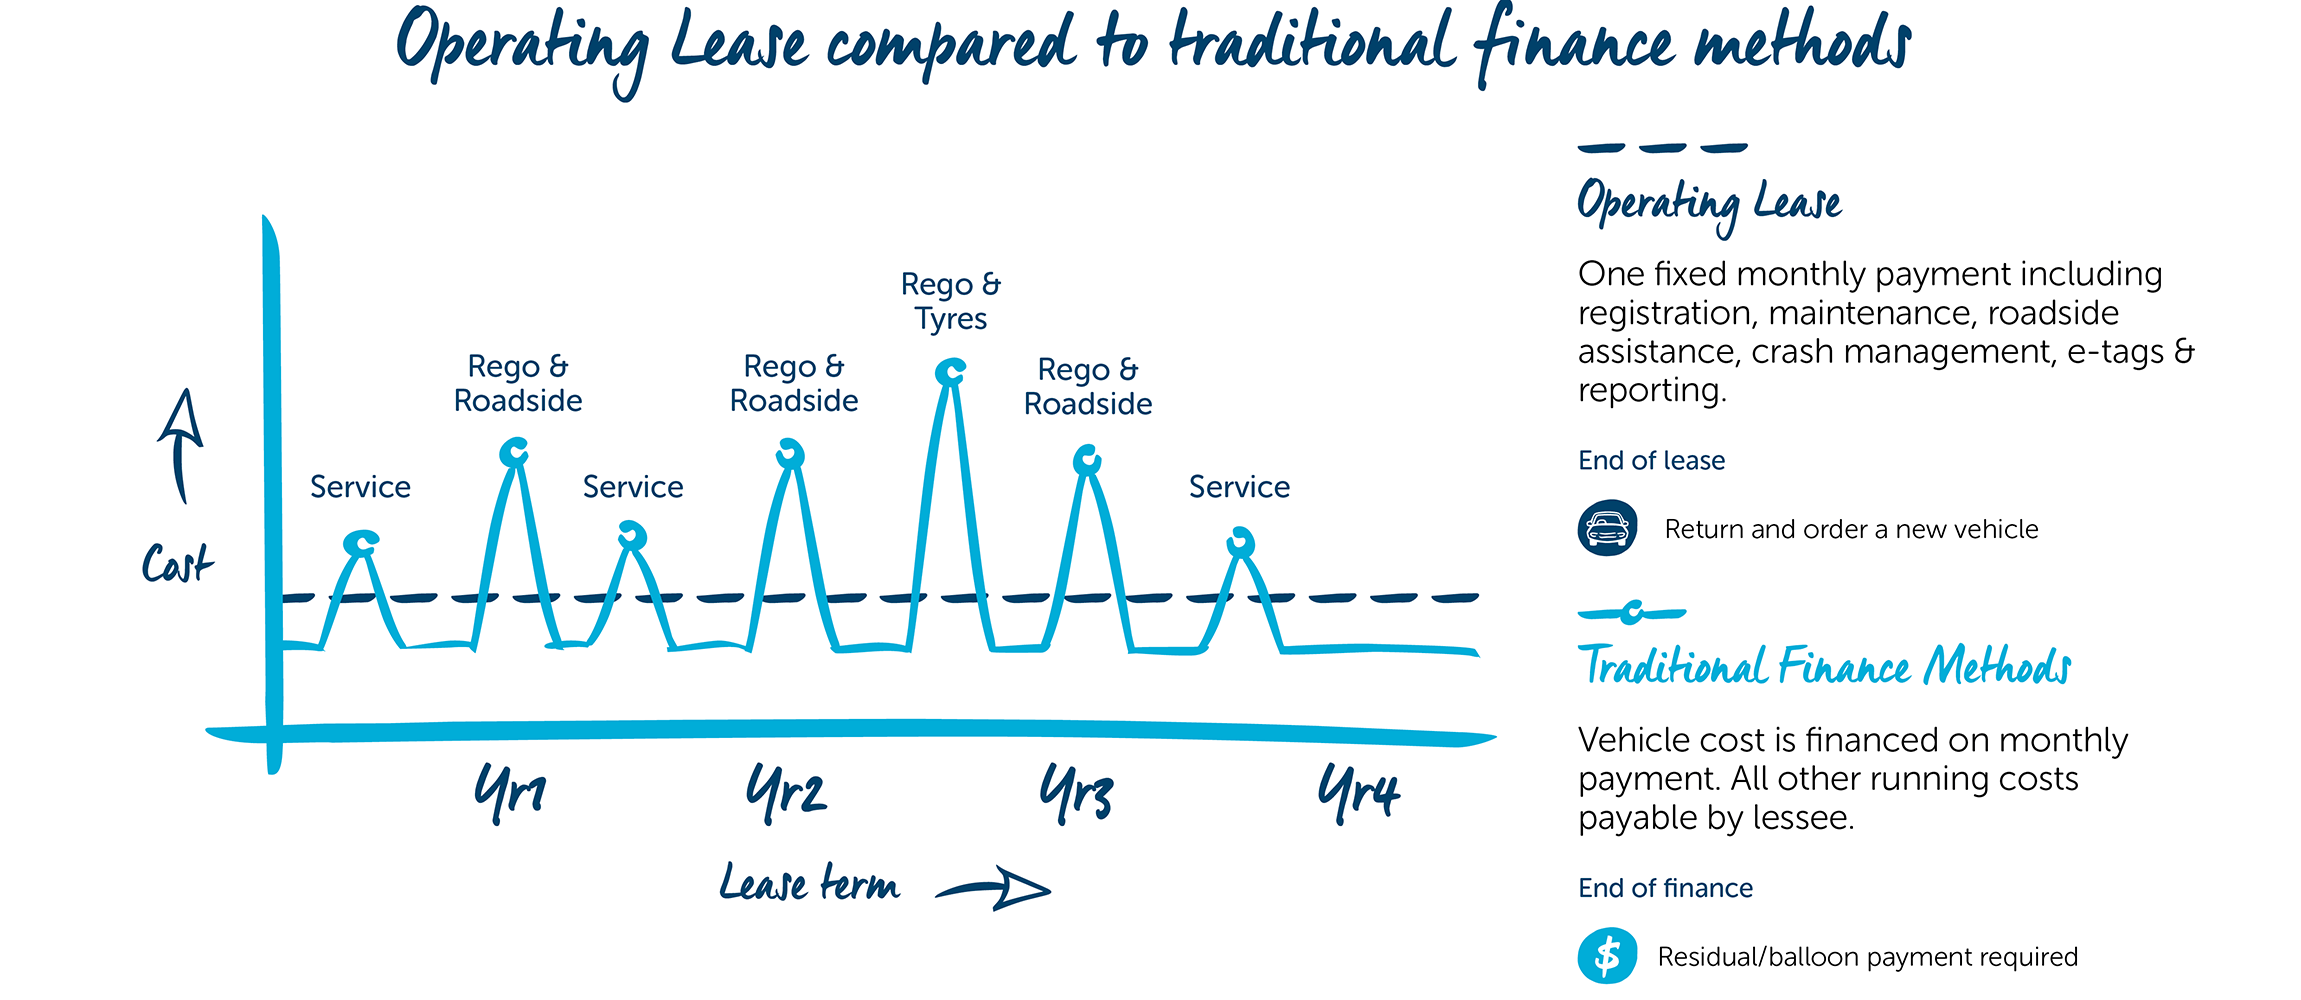 comparison of operating lease and traditional finance methods with explanation 